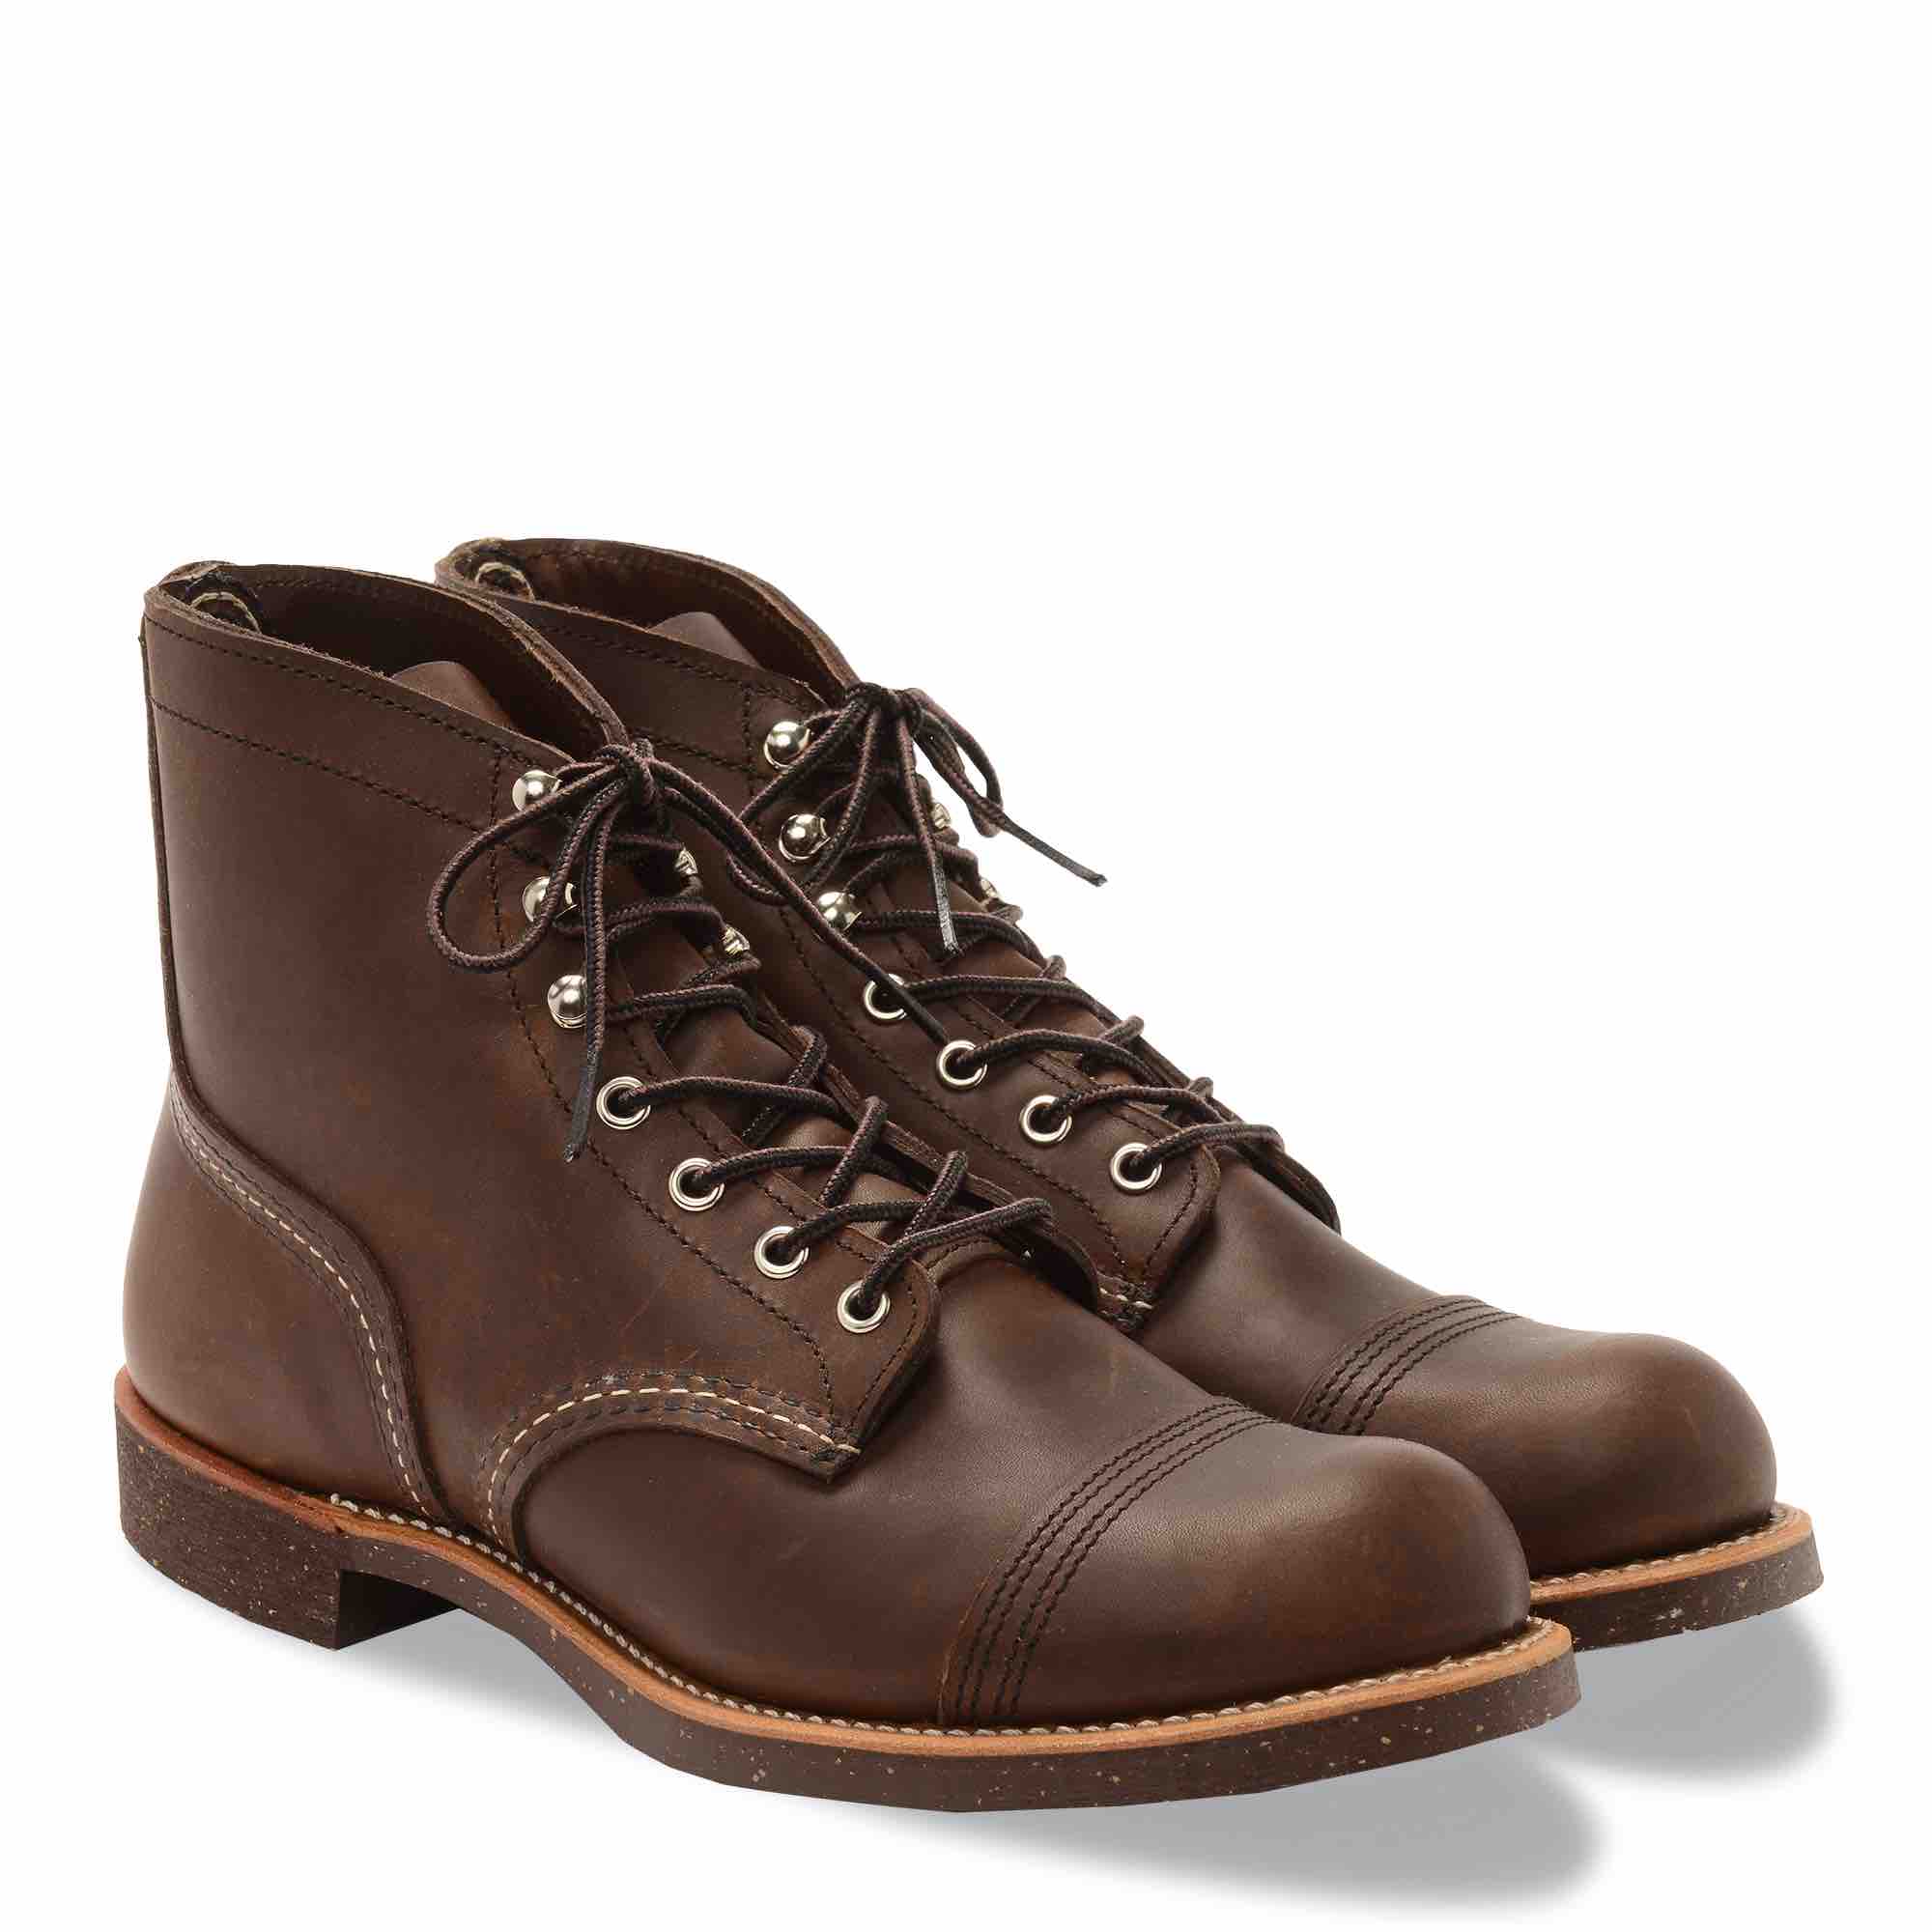 Red Wing - 8111 CORK SOLE - Iron Ranger 